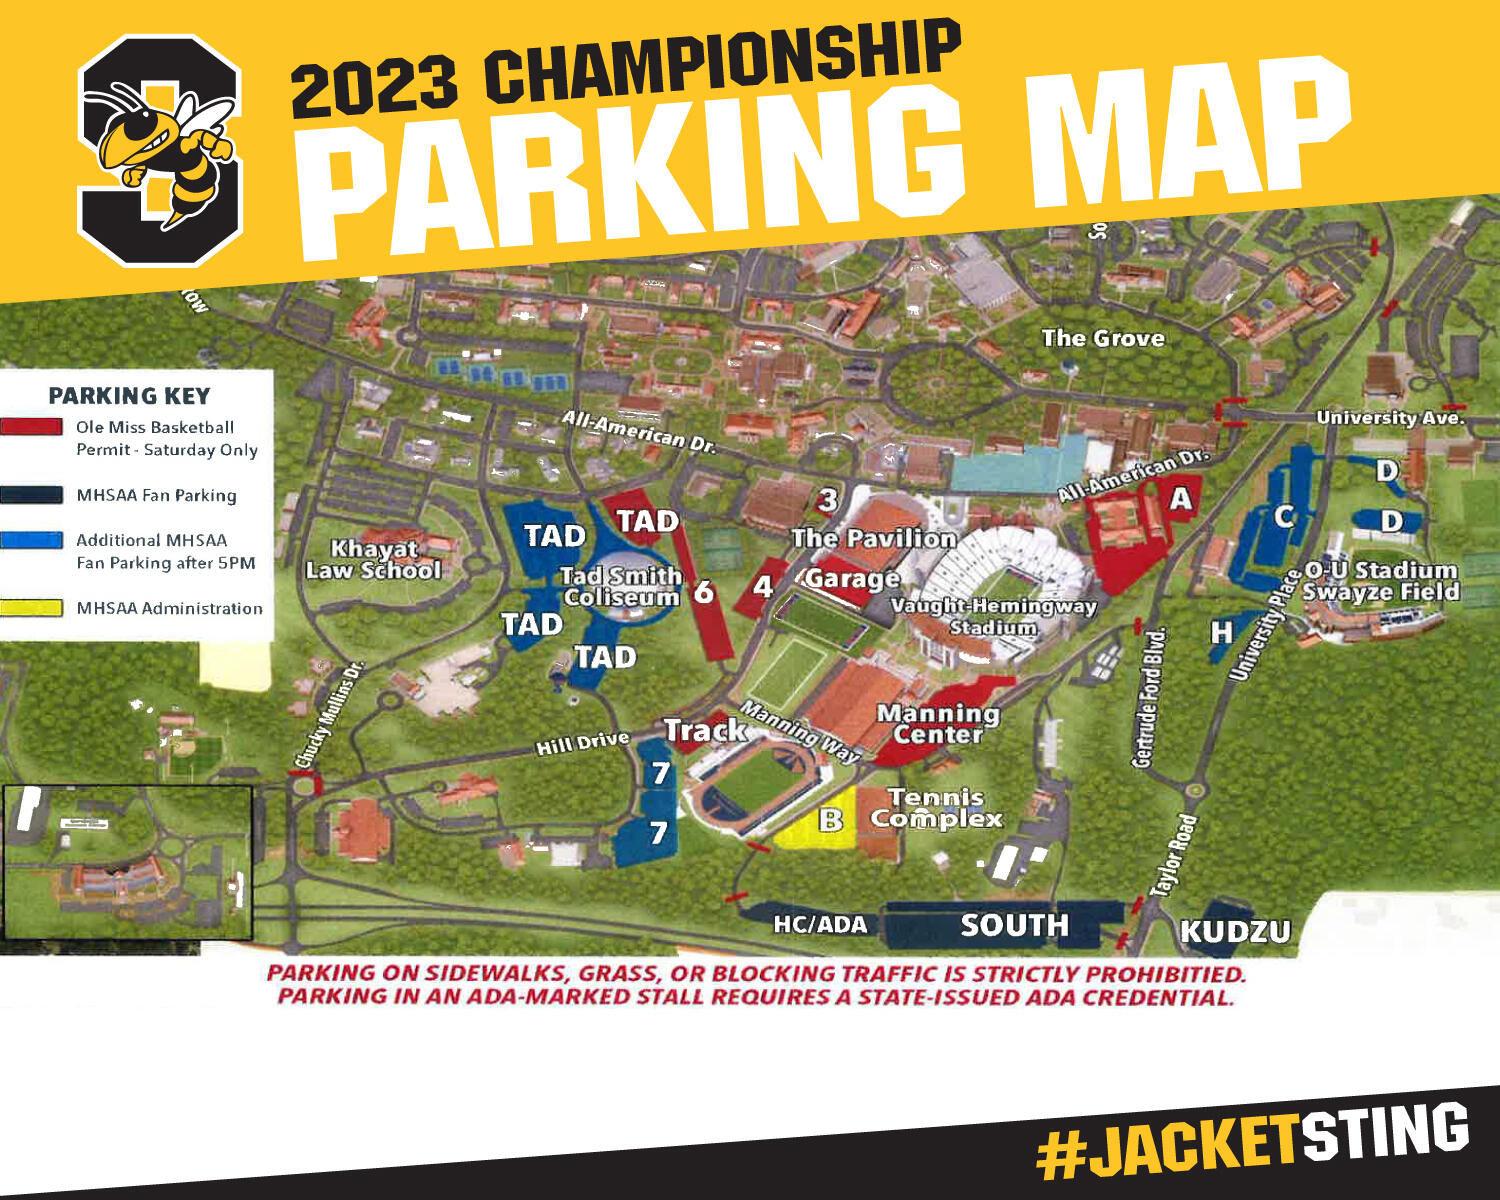 Ole Miss parking map for state championship